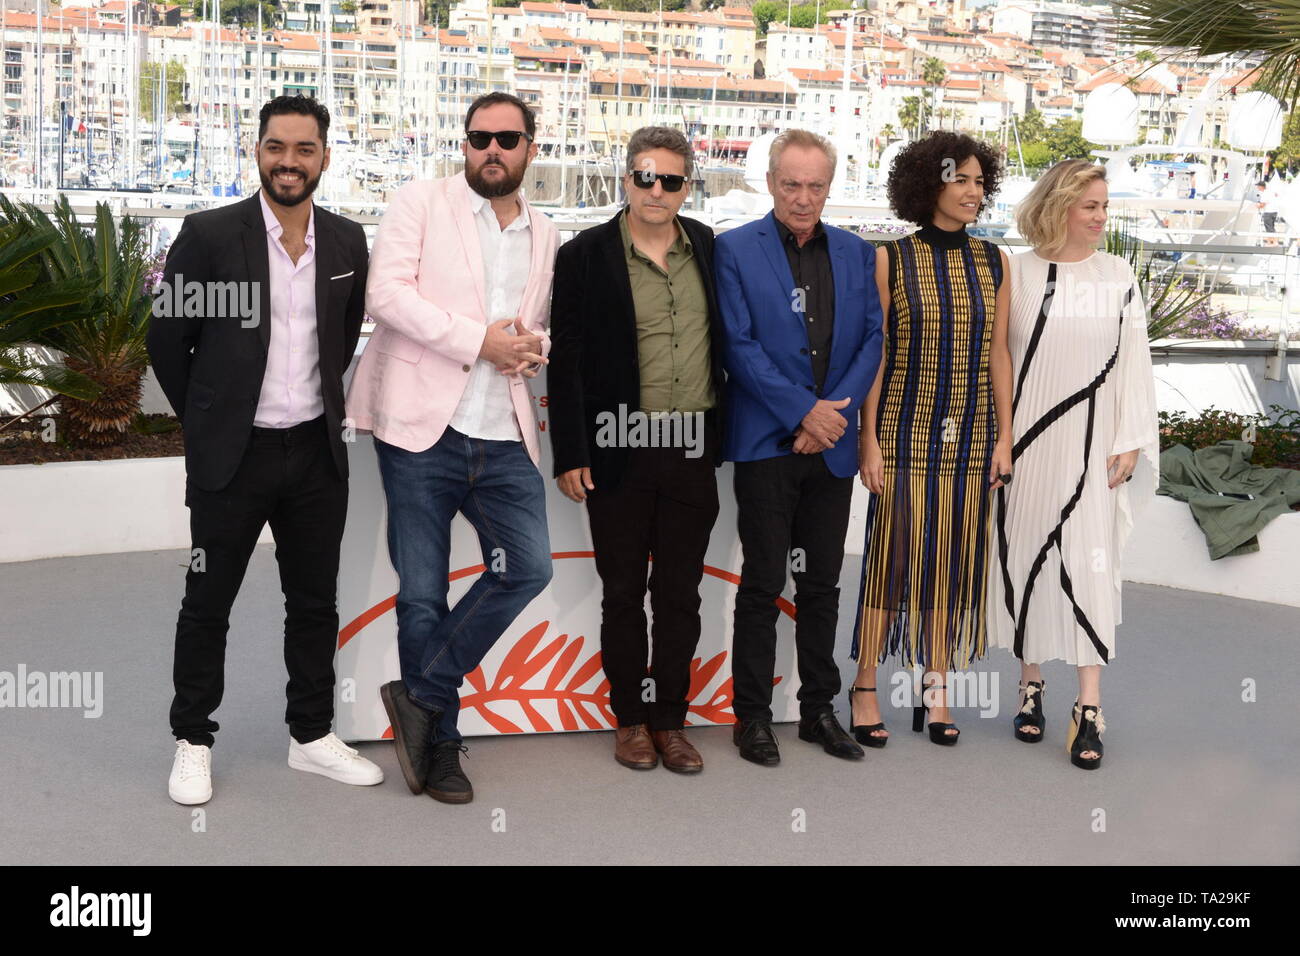 May 16, 2019 - Cannes, France - CANNES, FRANCE - MAY 16: (L-R) Thomas Aquino, Juliano Dornelles, Kleber MendonÃ§a Filho, Barbara Colen, Udo Kier and Karine Teles attend the photocall for ''Bacurau'' during the 72nd annual Cannes Film Festival on May 16, 2019 in Cannes, France. (Credit Image: © Frederick InjimbertZUMA Wire) Stock Photo